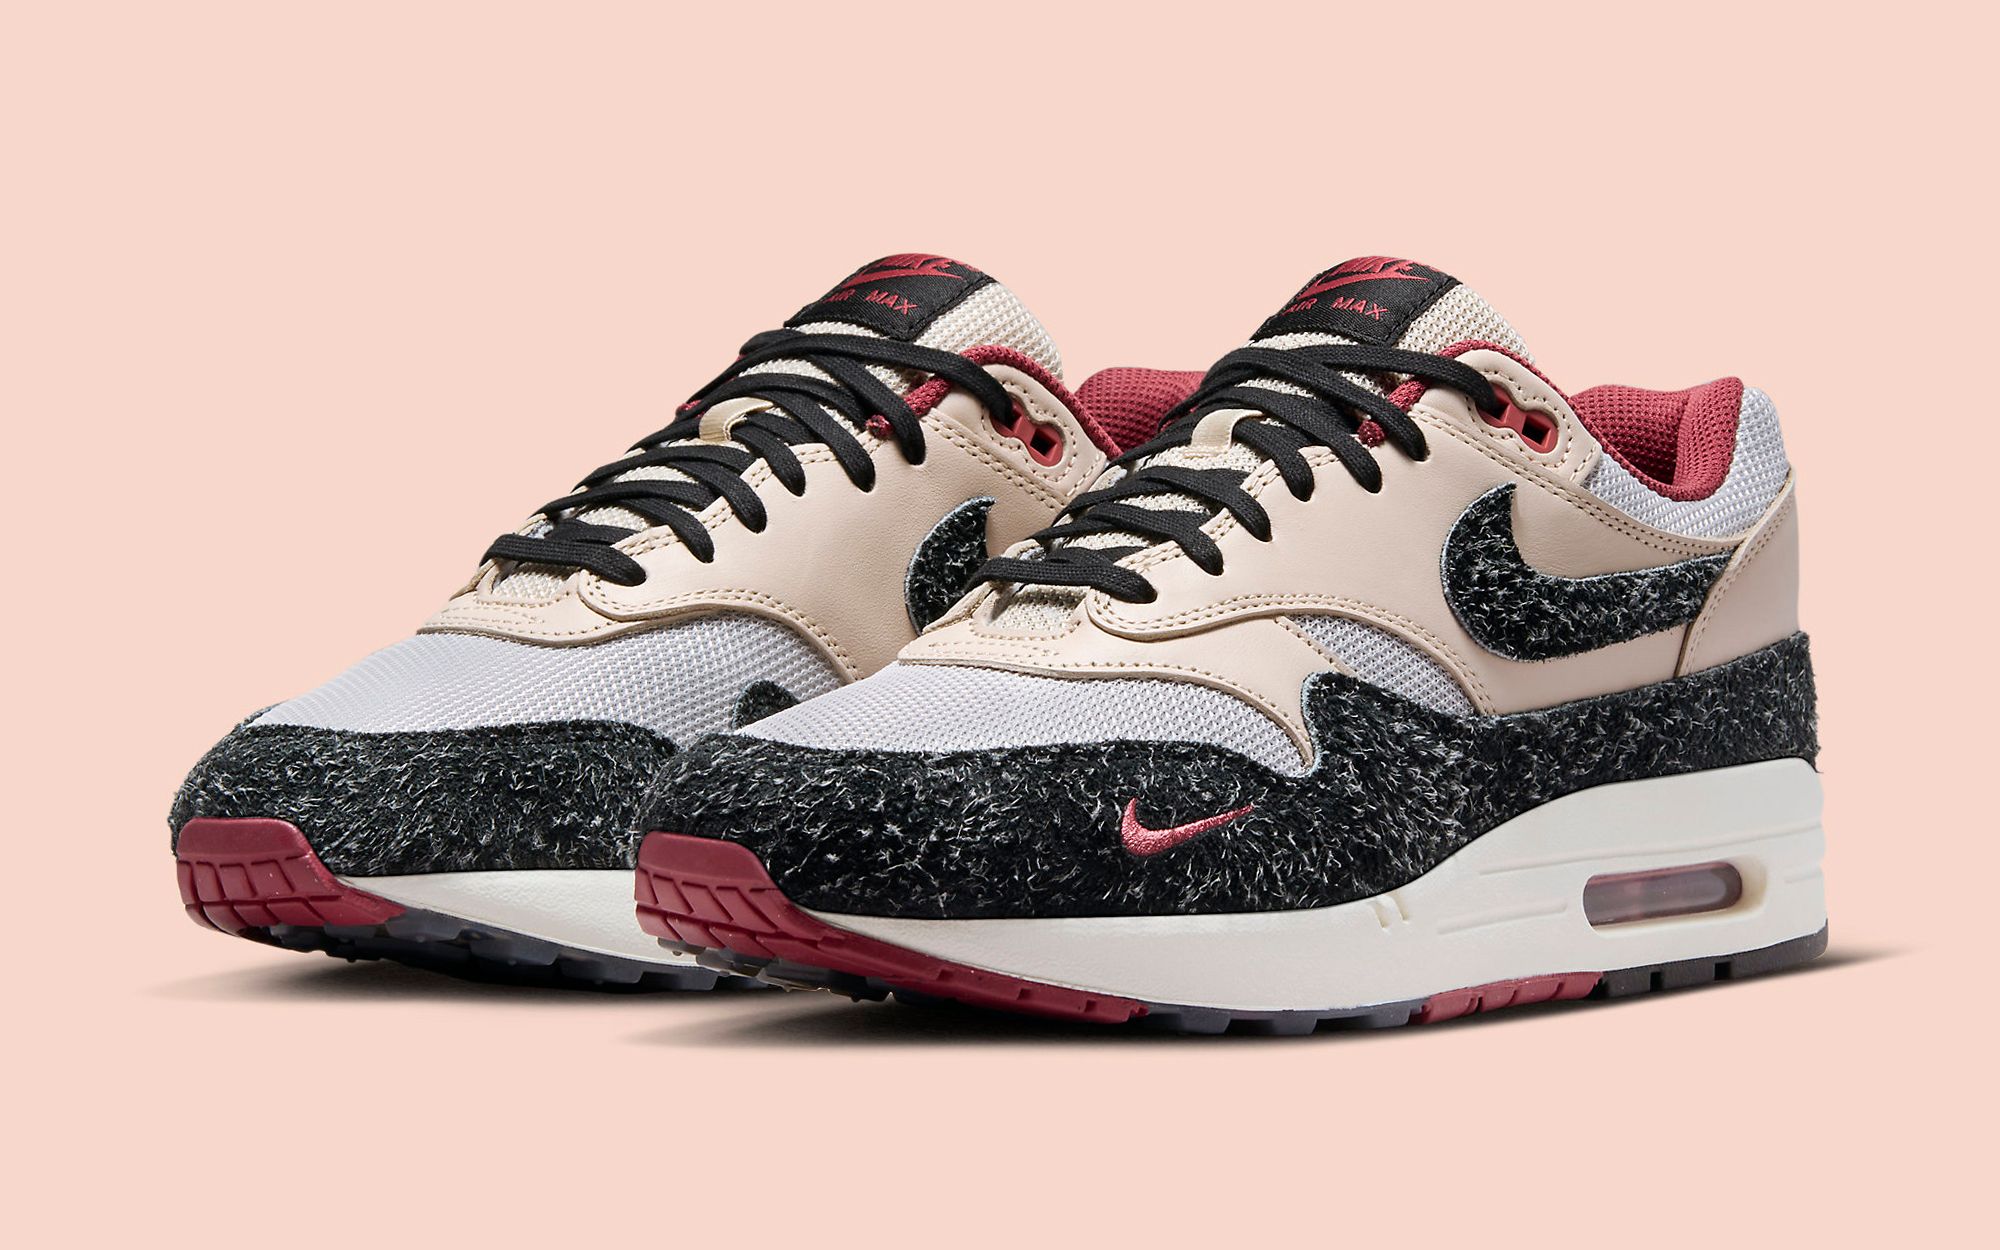 Nike Air Max 1 Chili 2.0: Review & On-Feet 